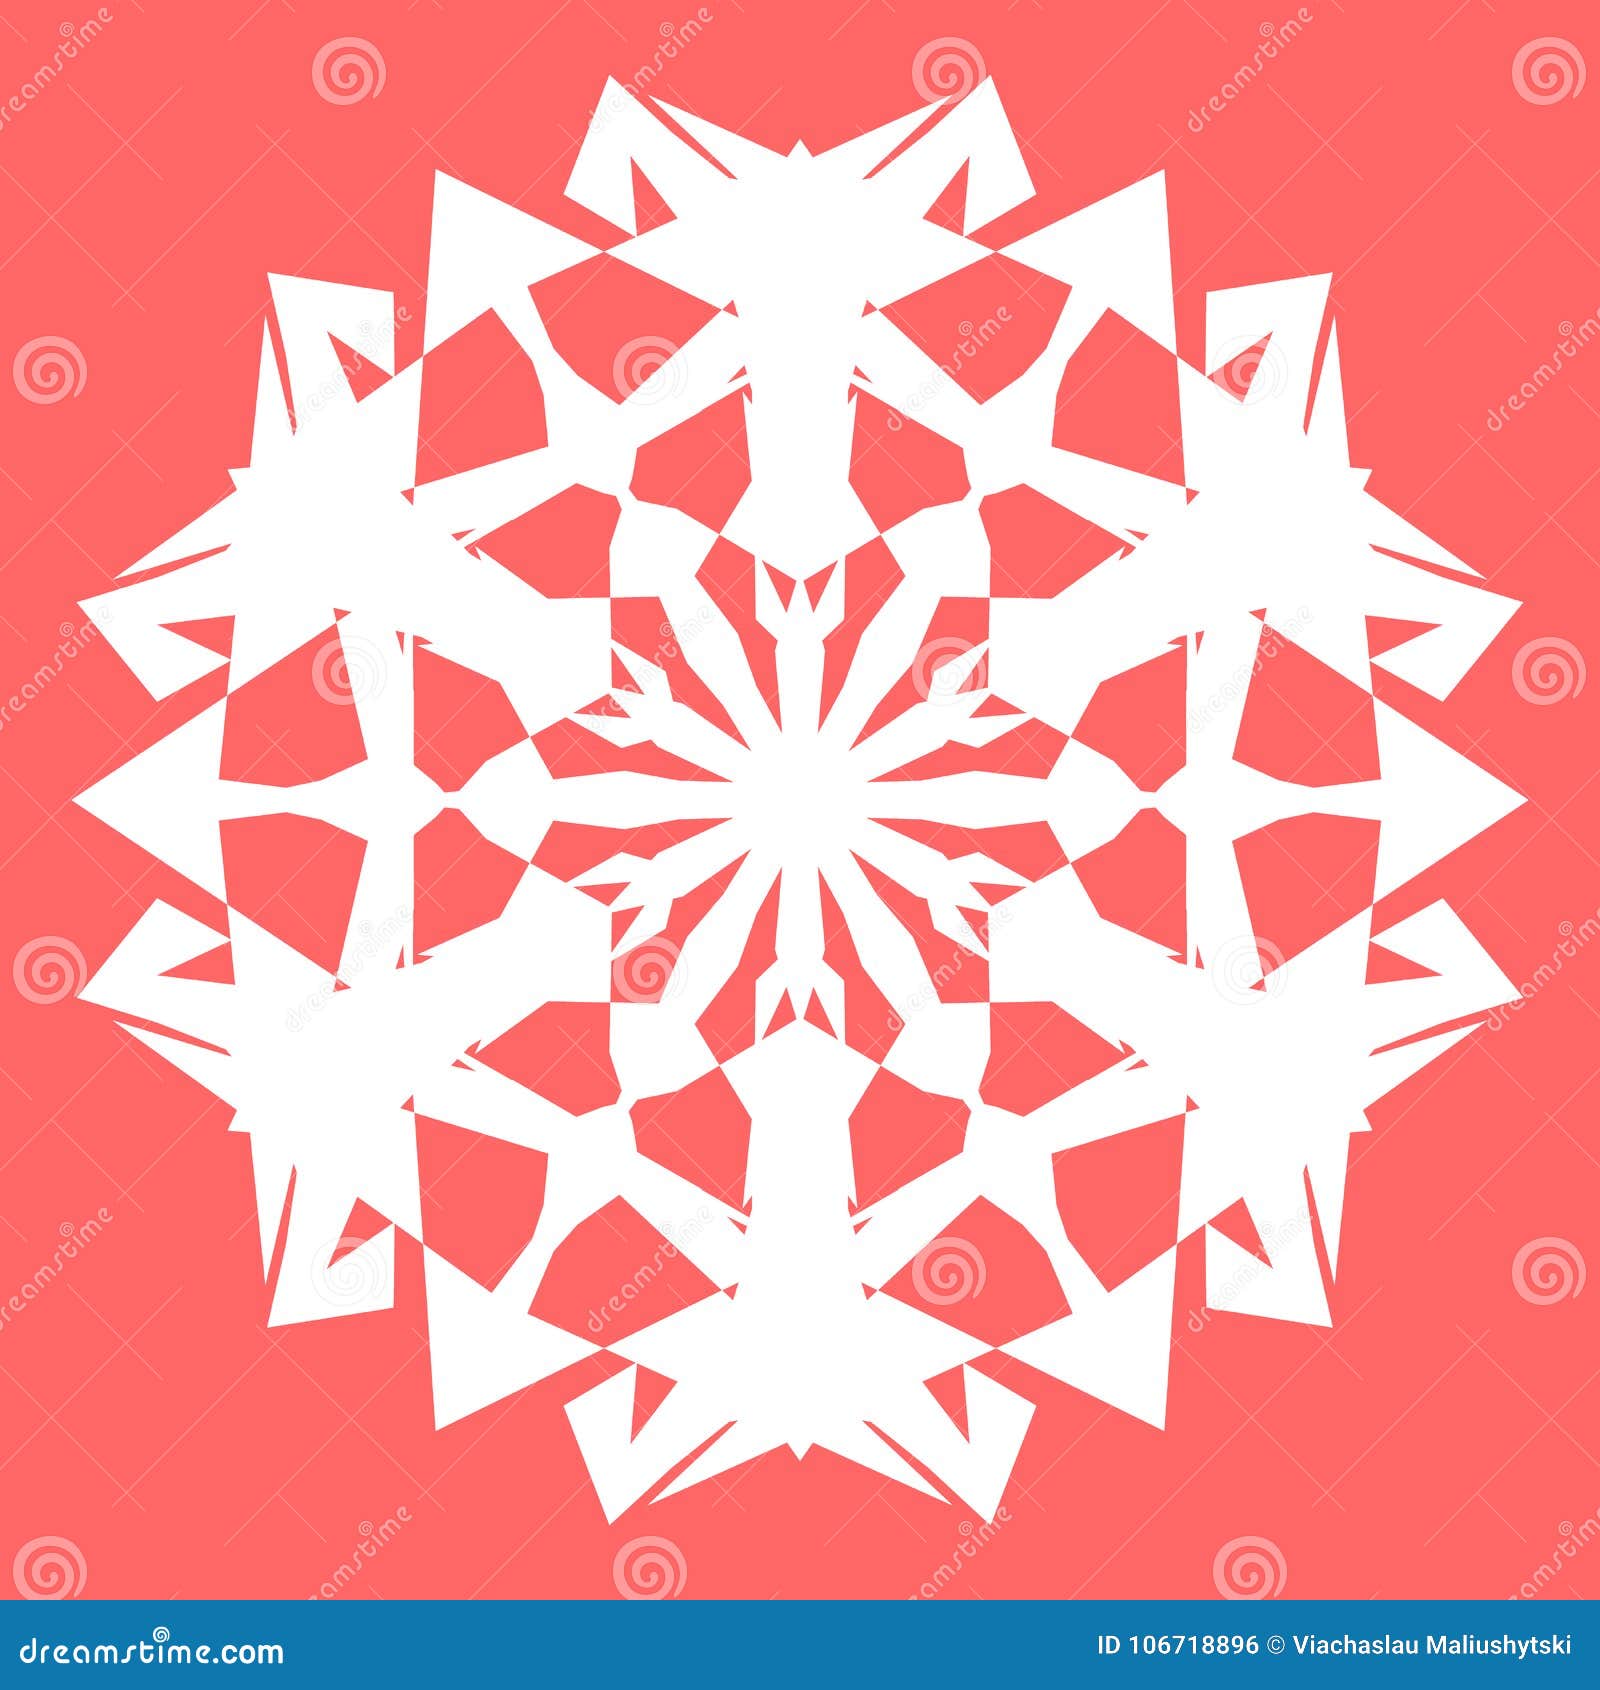 Download White Snowflake. Snowflake For Posters, Cards, Invitation ...